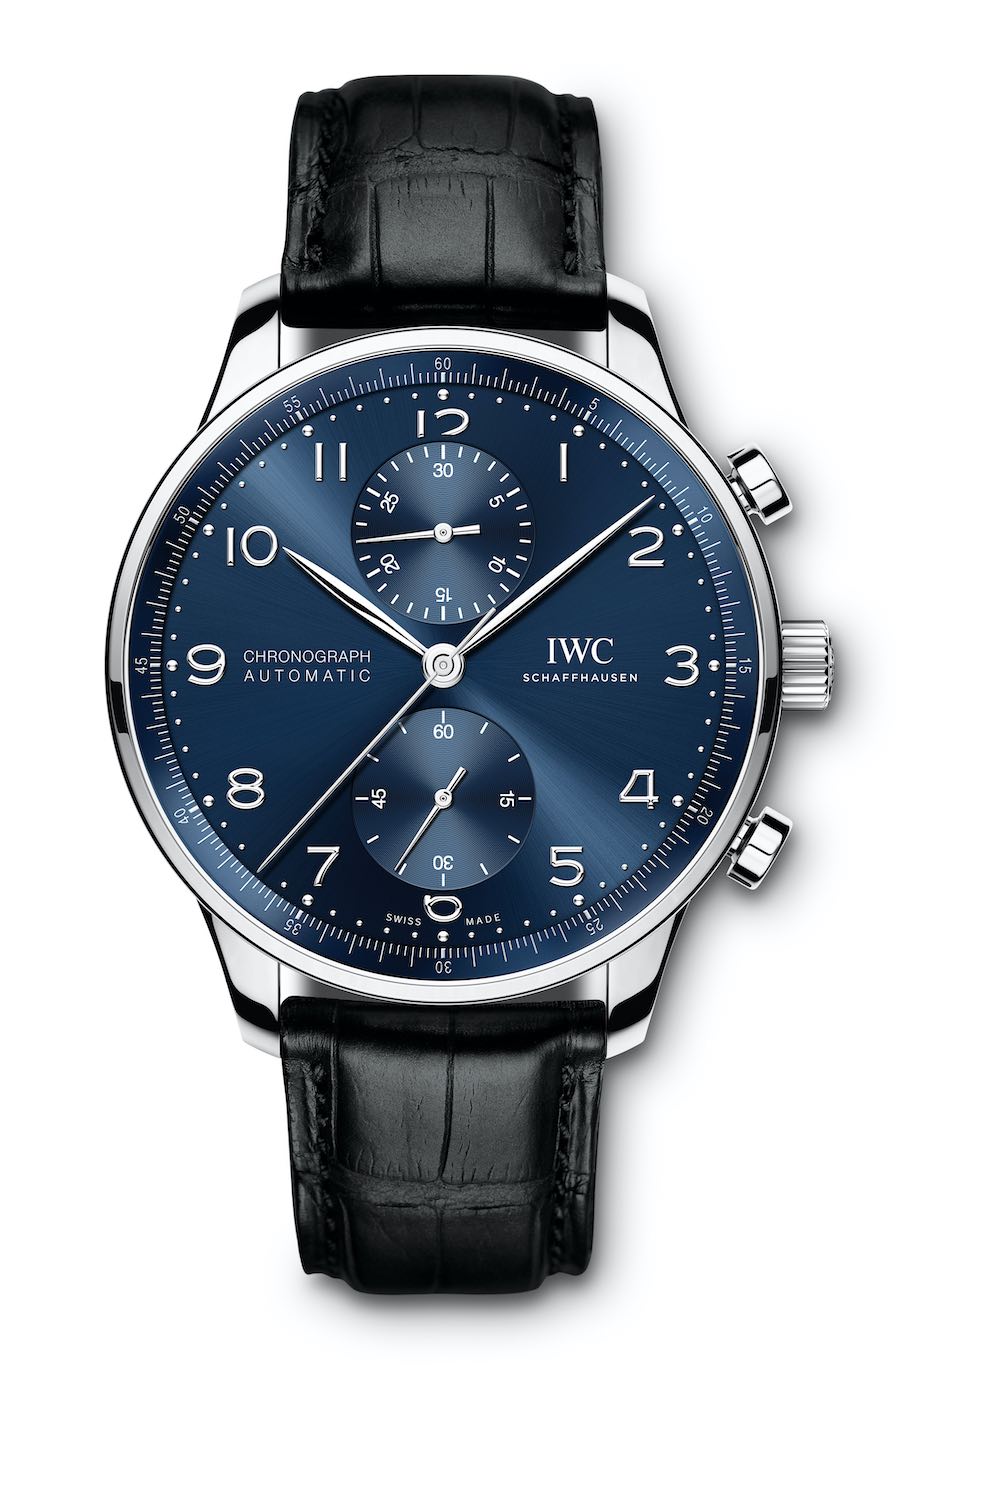 IWC Portugieser Chronograph iw3716 in-house calibre 69335 - iw371606